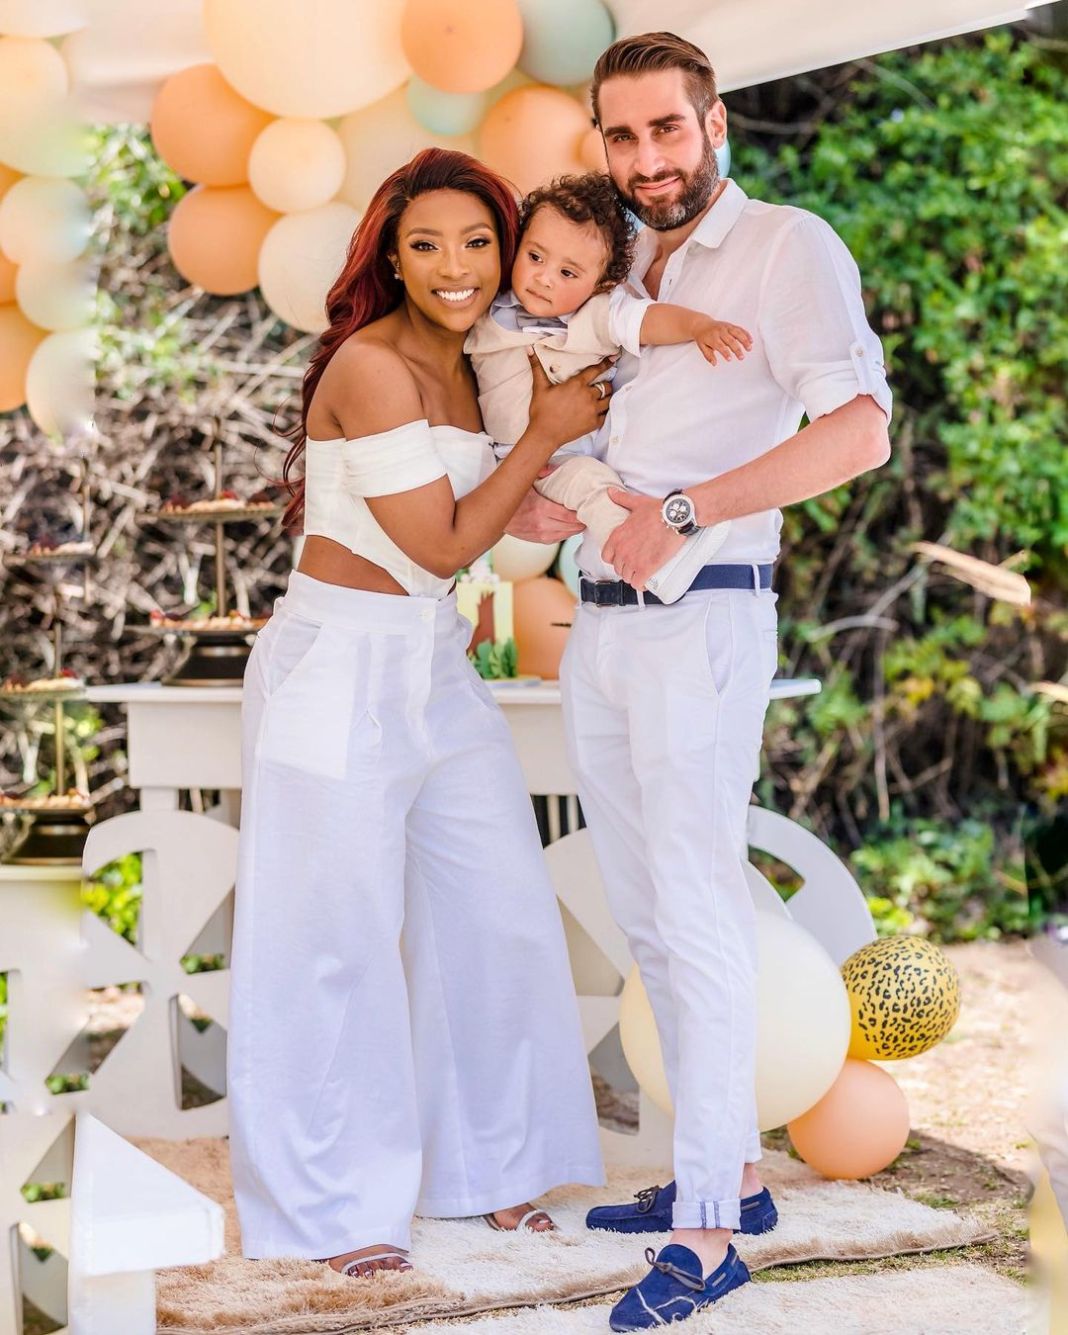 Pearl Modiadie's Baby Daddy Nathaniel Oppenheimer